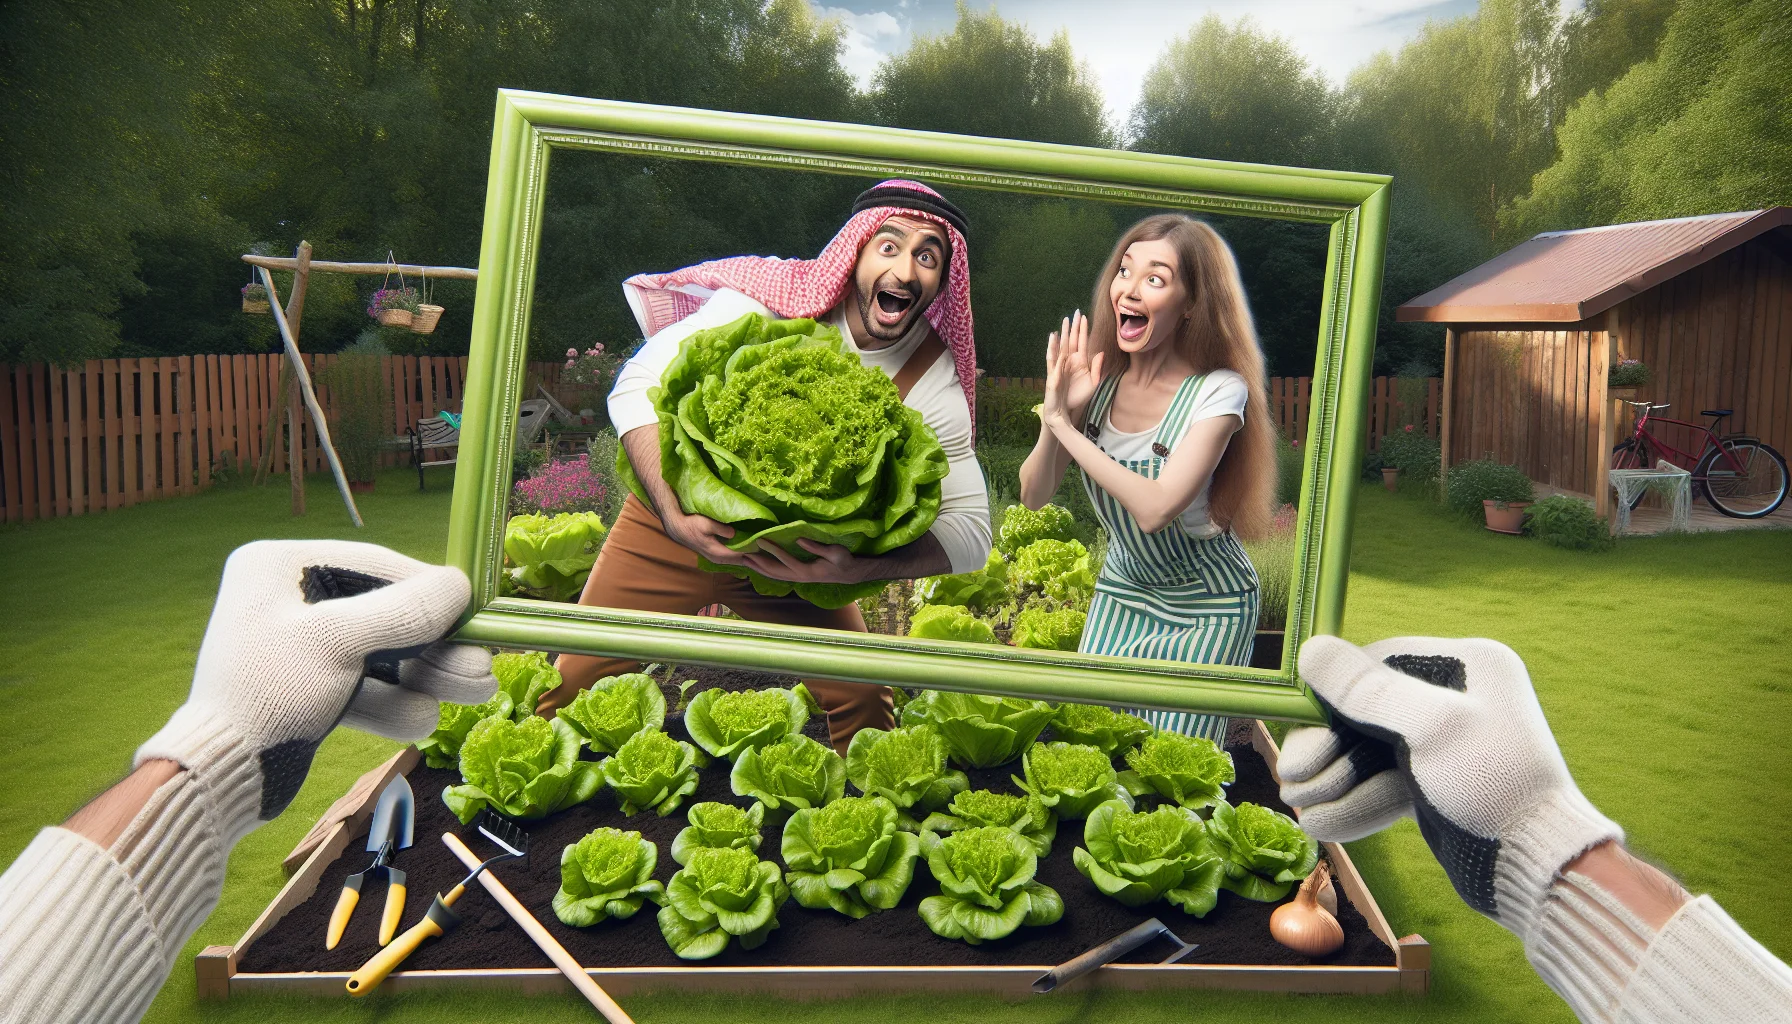 In a playful and humour-filled scenario, Imagine a Middle-Eastern man and a Caucasian woman indulging in gardening. They are delightfully taken aback by the gigantic size of their harvest lettuce which has grown as tall as them. Their eyes are lit up in laughter and the man is comically attempting to carry the huge lettuce with both of his arms. The woman is pointing towards the oversized vegetable expressing her disbelief. Their tools of gardening are nearby, illustrating their hard work. Through a picture frame, capture the joys of gardening oozing from every corner of their lush green garden.